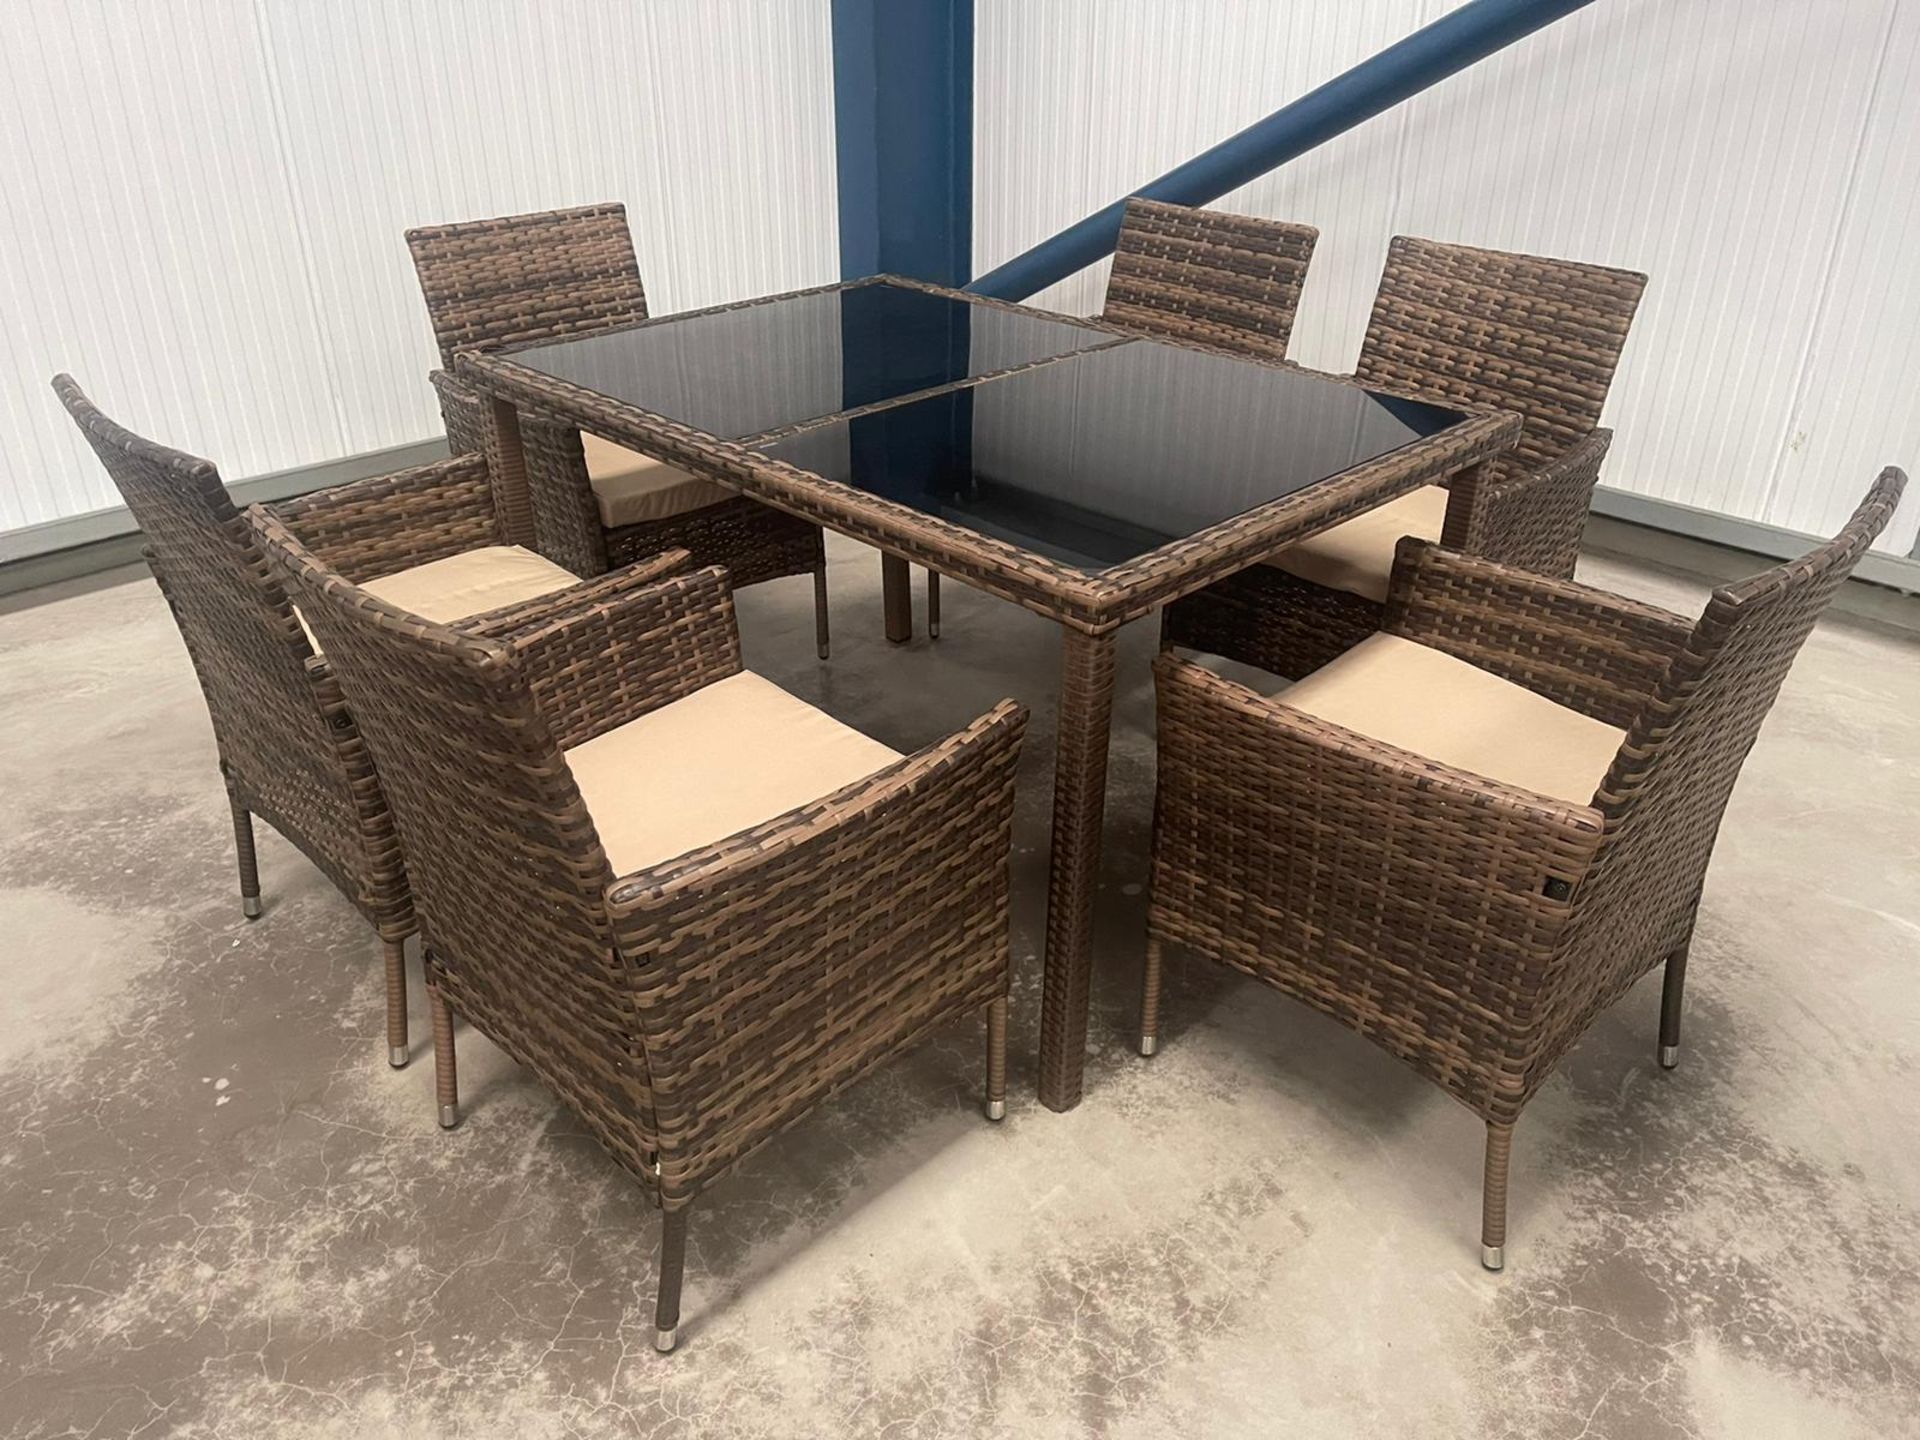 RRP £999 - NEW BROWN SIX SEAT DINING SET WITH SIX CHAIRS - LUXURY BLACK GLASS TOPPED DINING TABLE